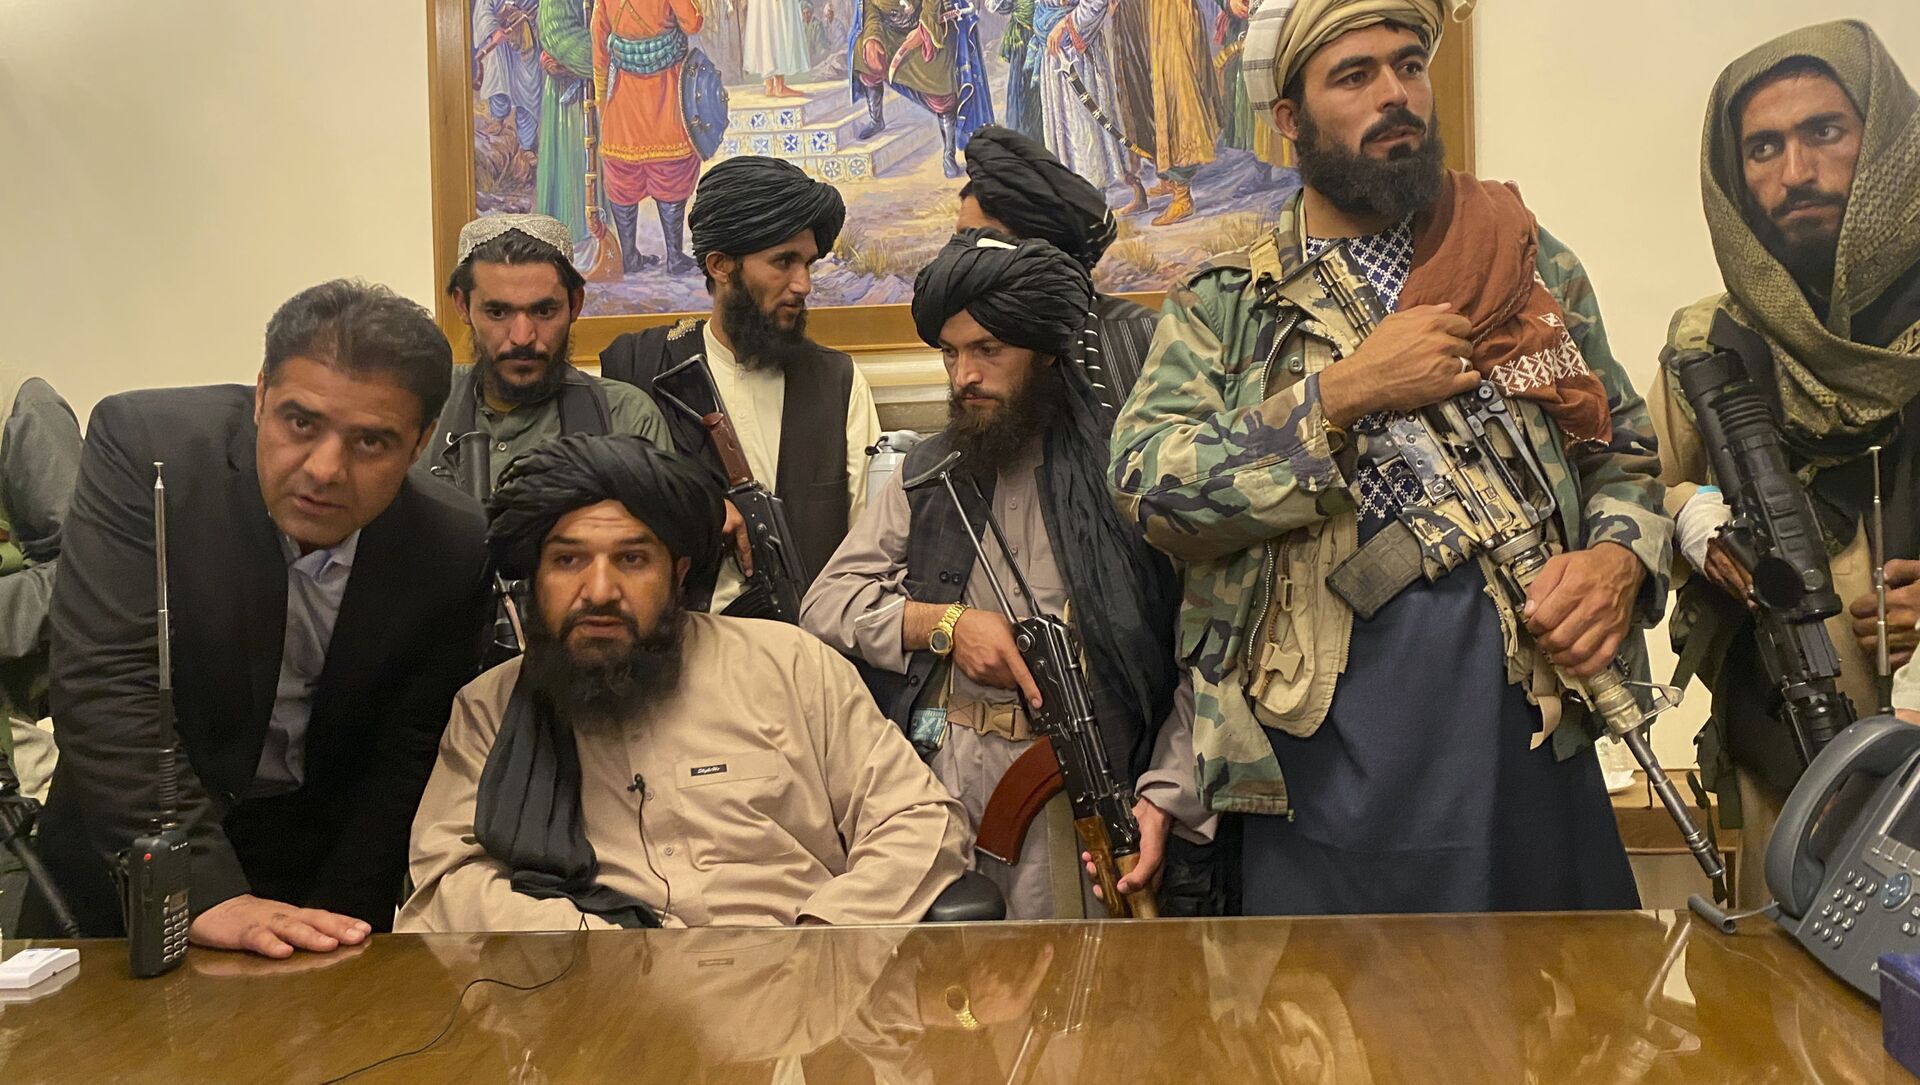 Taliban fighters take control of Afghan presidential palace after the Afghan President Ashraf Ghani fled the country, in Kabul, Afghanistan, Sunday, Aug. 15, 2021. - Sputnik International, 1920, 17.08.2021